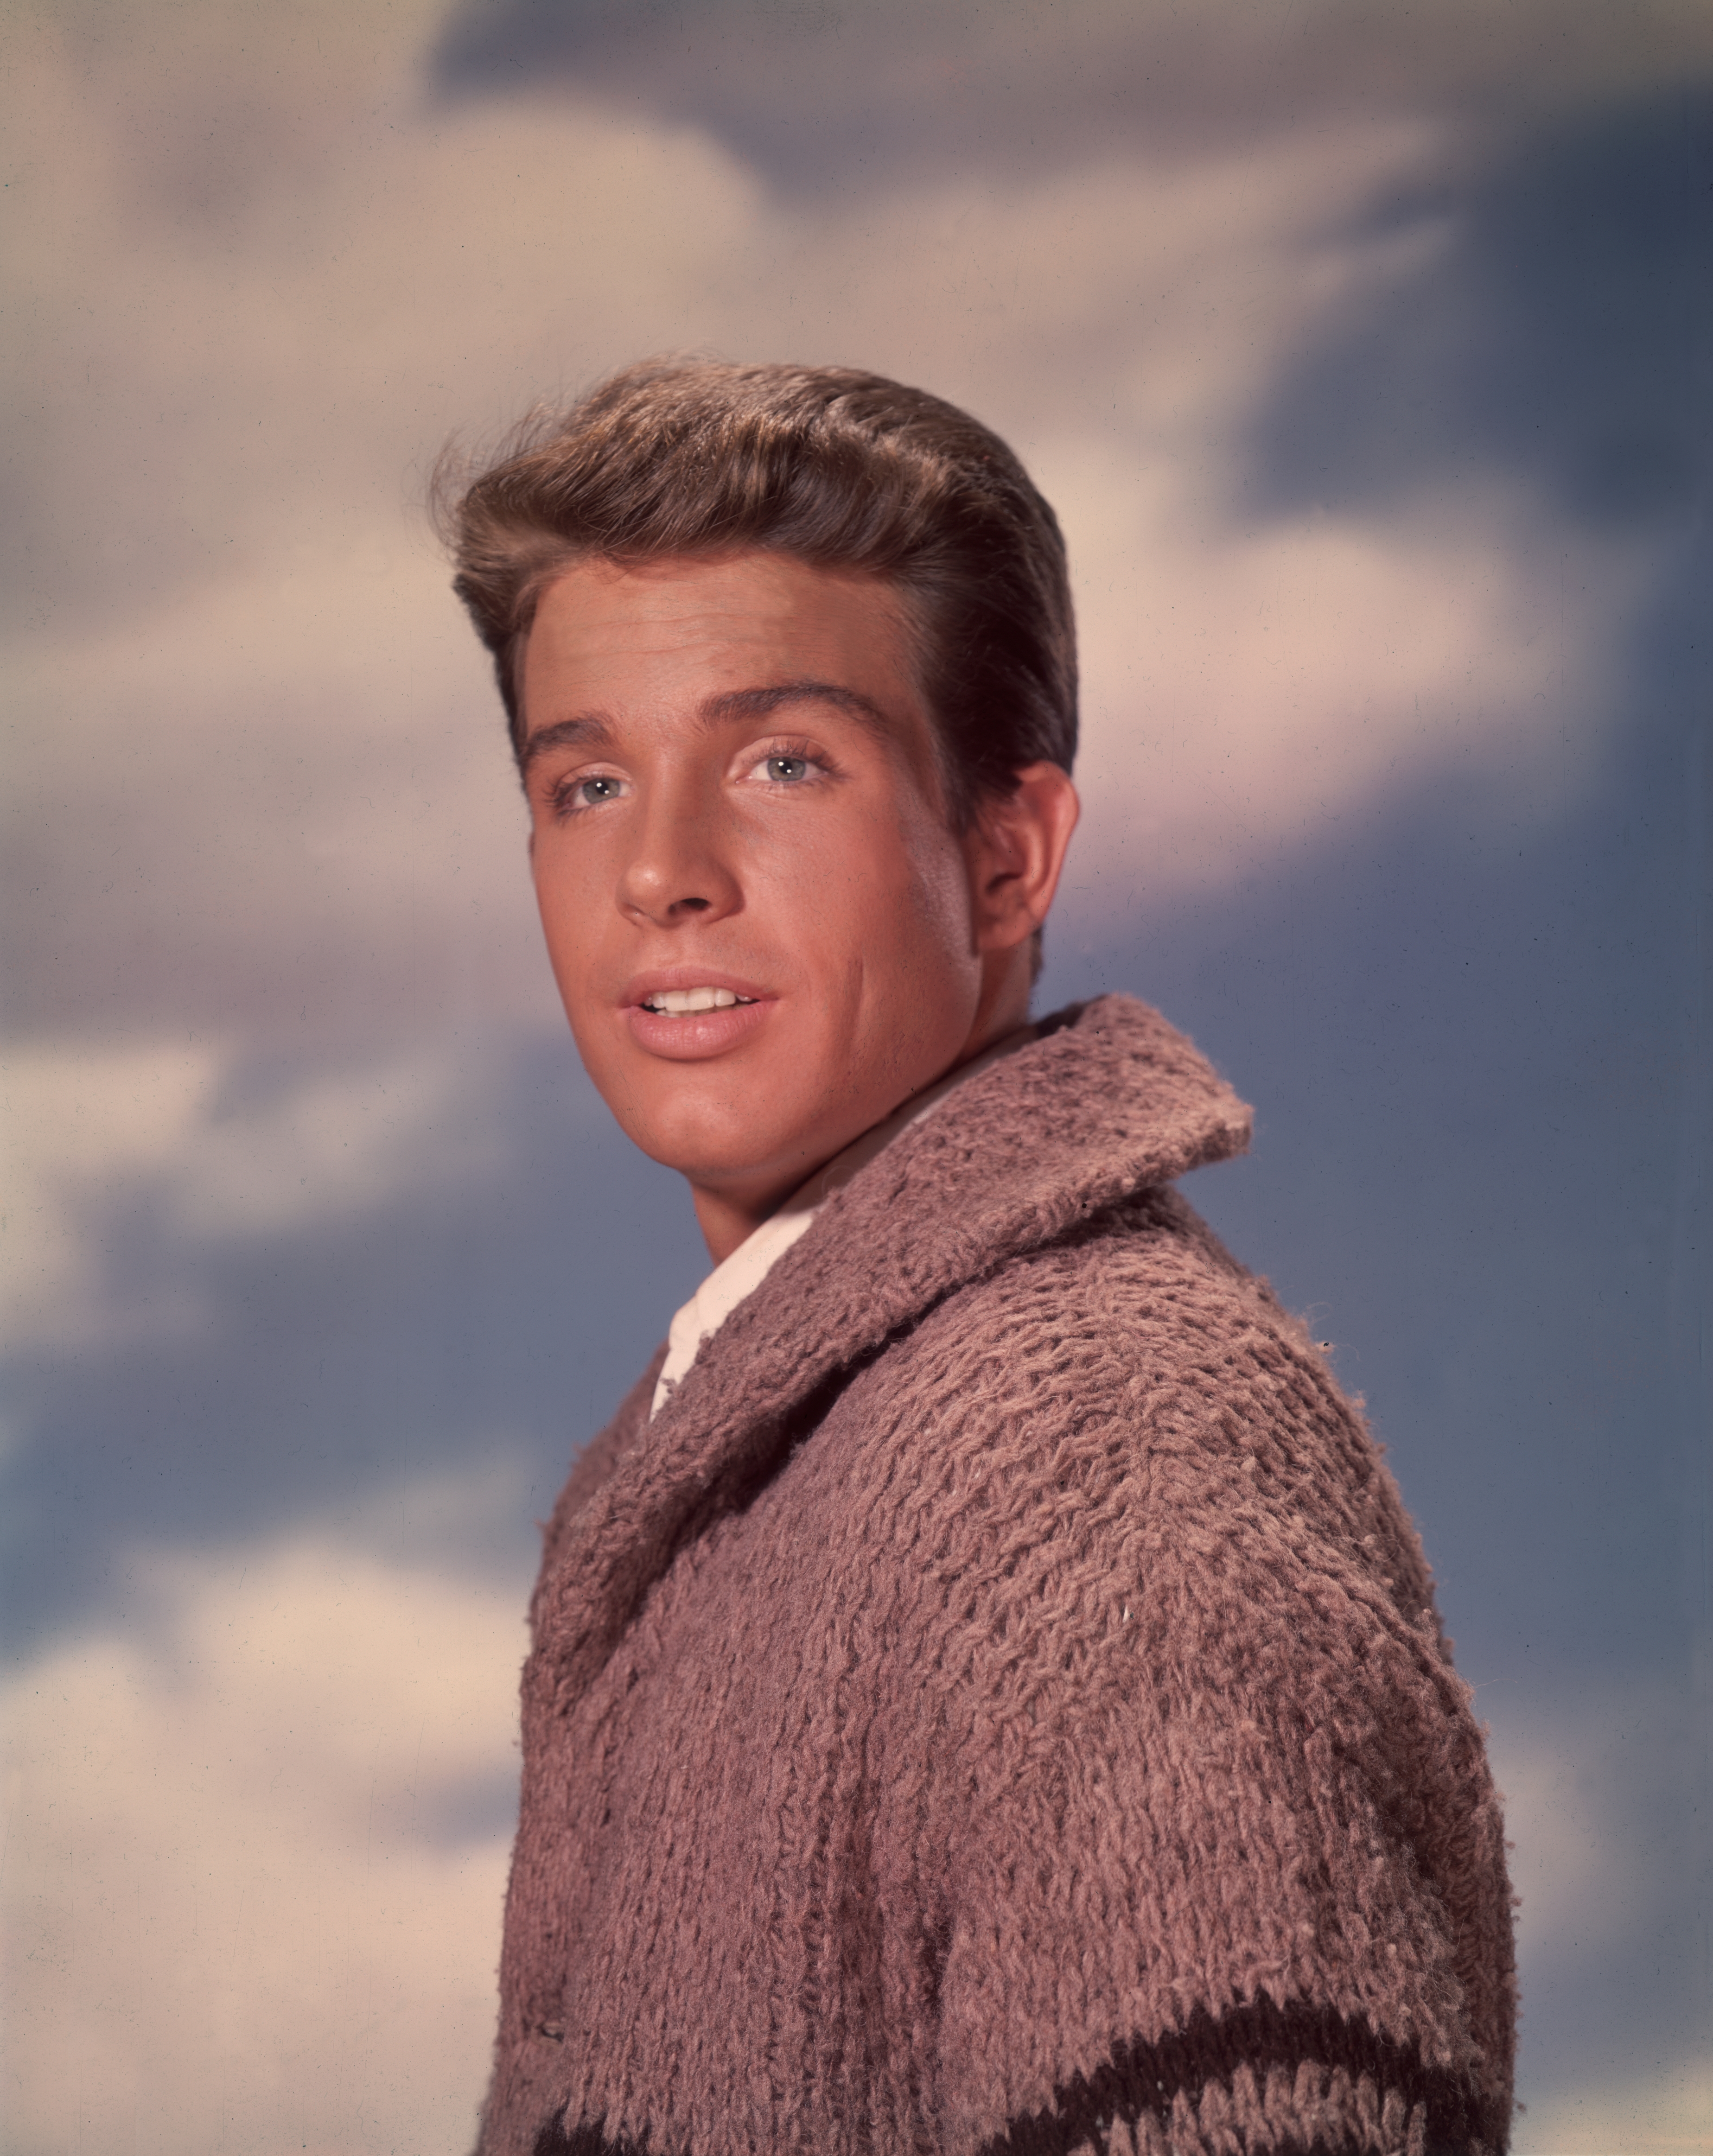 A studio portrait of actor Warren Beatty wearing a cardigan sweater on January 1, 1962 | Source: Getty Images